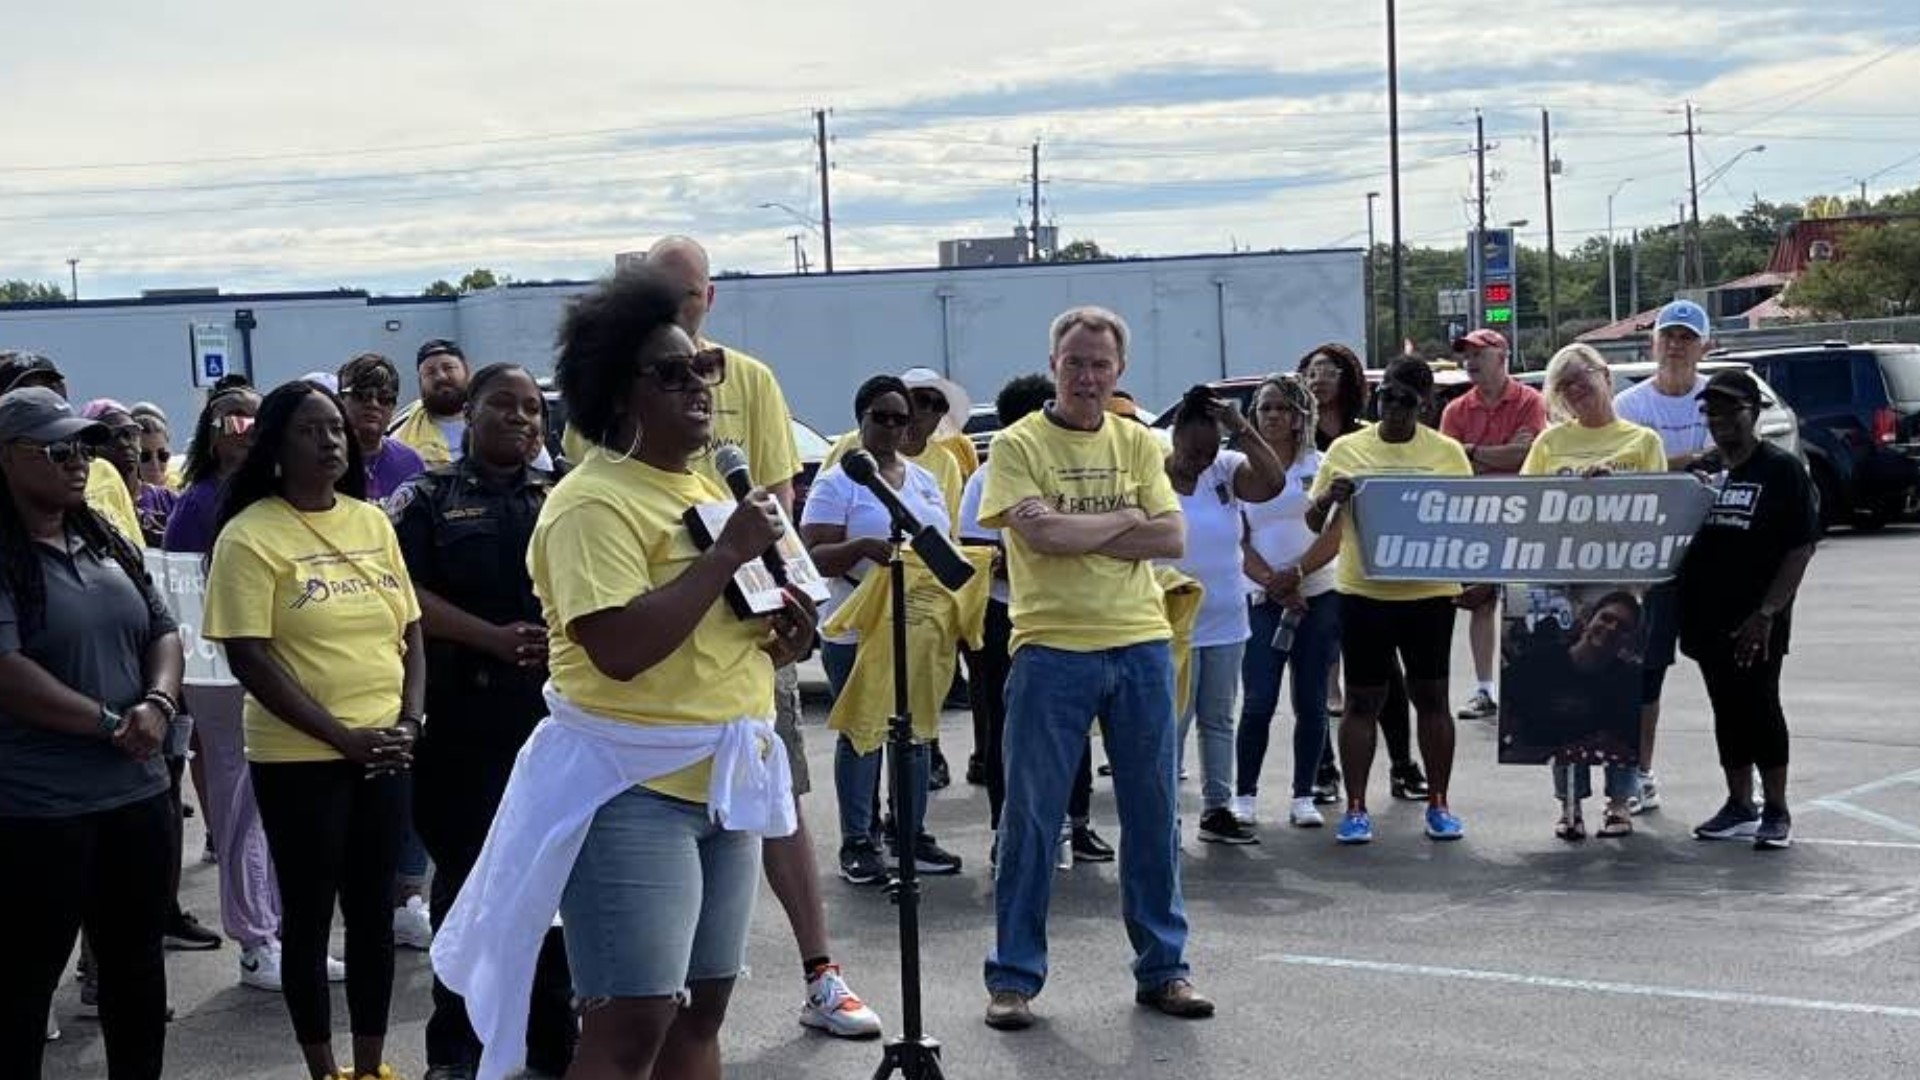 13News reporter Matthew Fultz reports from the Far East Side Community peace walk that honors those lost to gun violence.